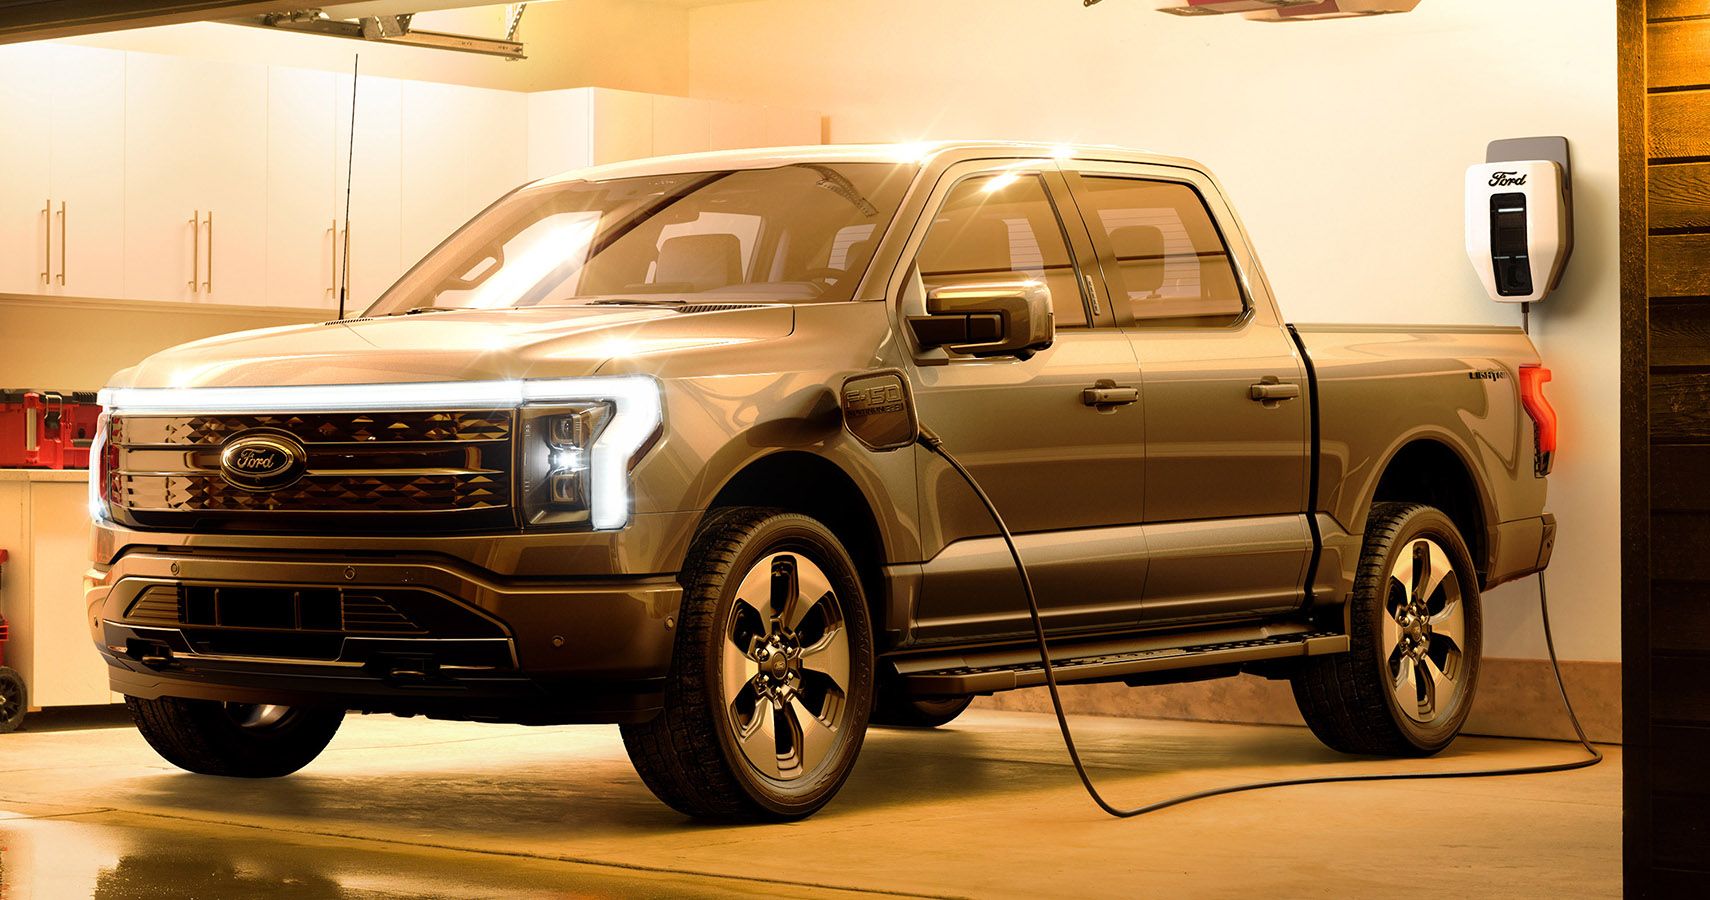 Ford F-150 Lightning charging at home